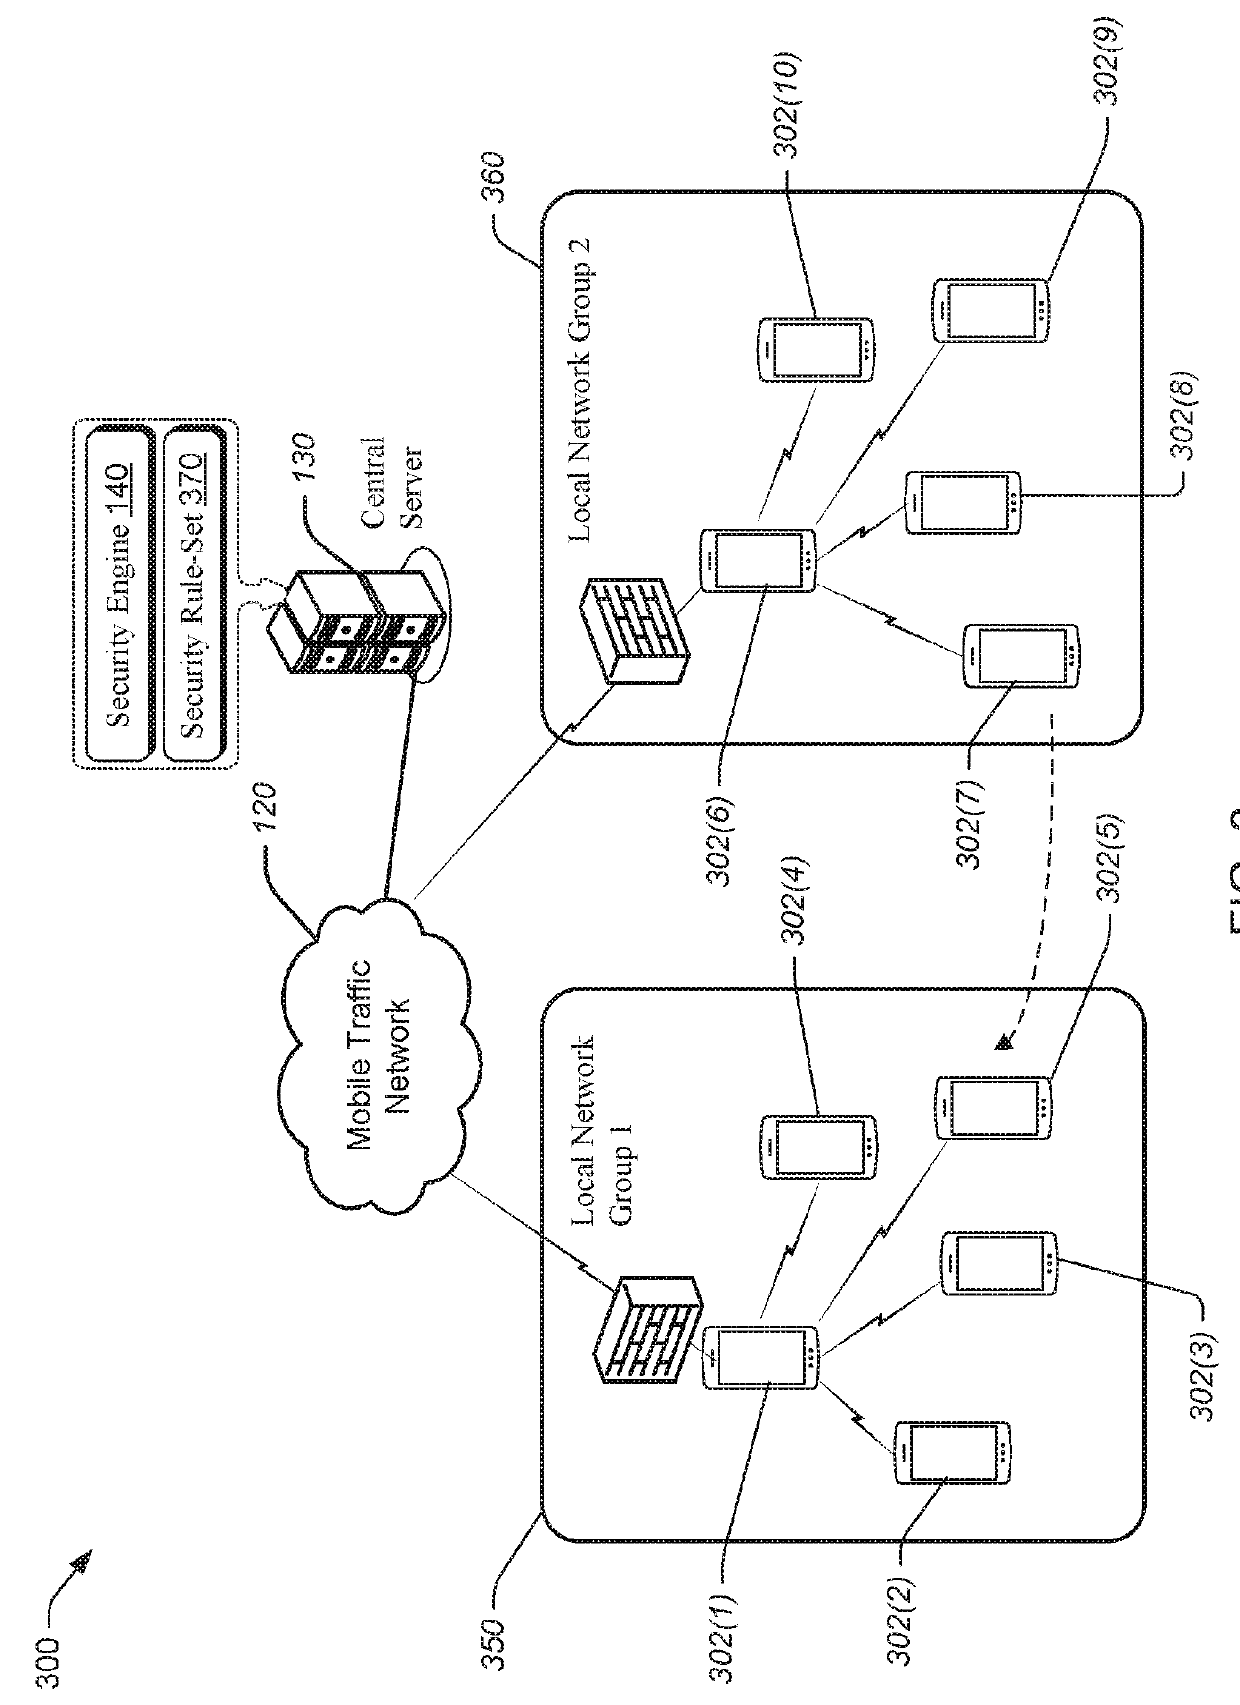 Dynamic provisioning of a firewall role to user devices